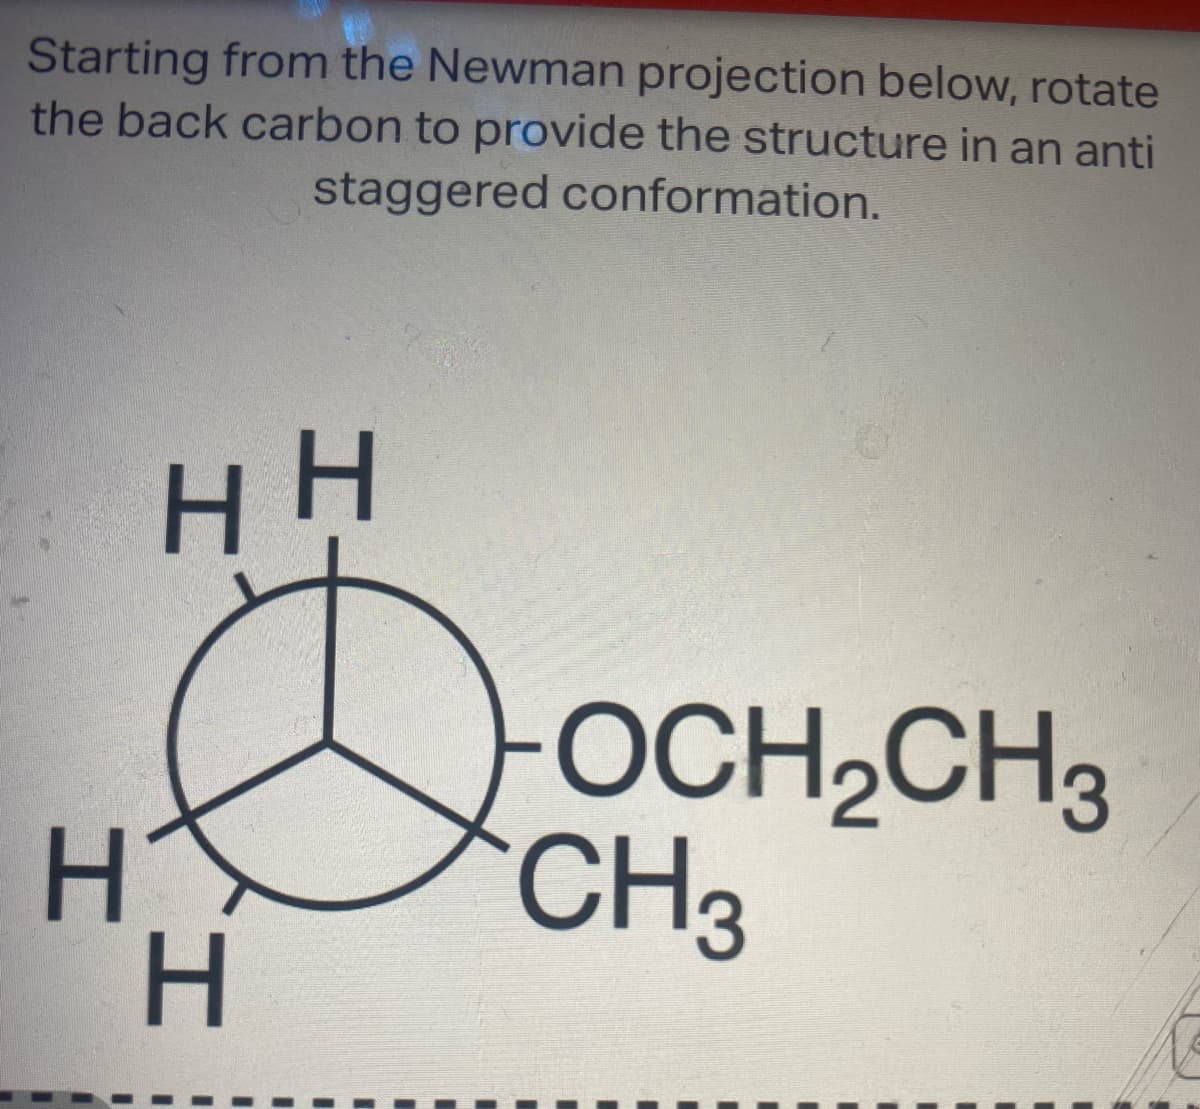 Starting from the Newman projection below, rotate
the back carbon to provide the structure in an anti
staggered conformation.
HH
HY
H
-OCH₂CH3
CH3